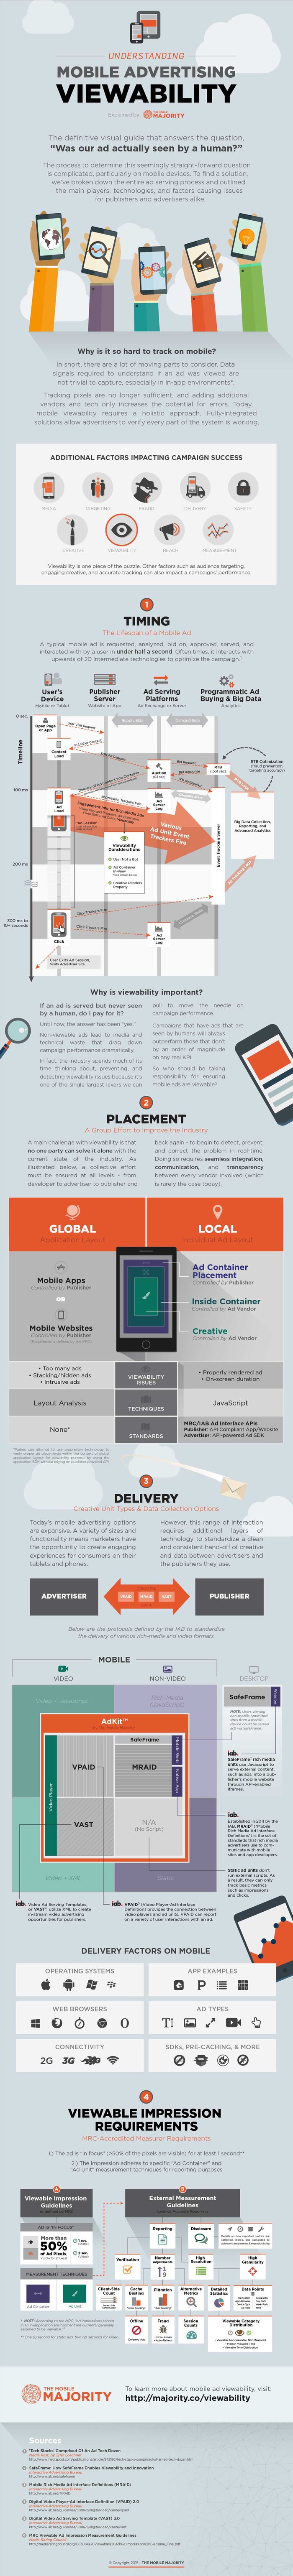 mobile-advertising-viewability